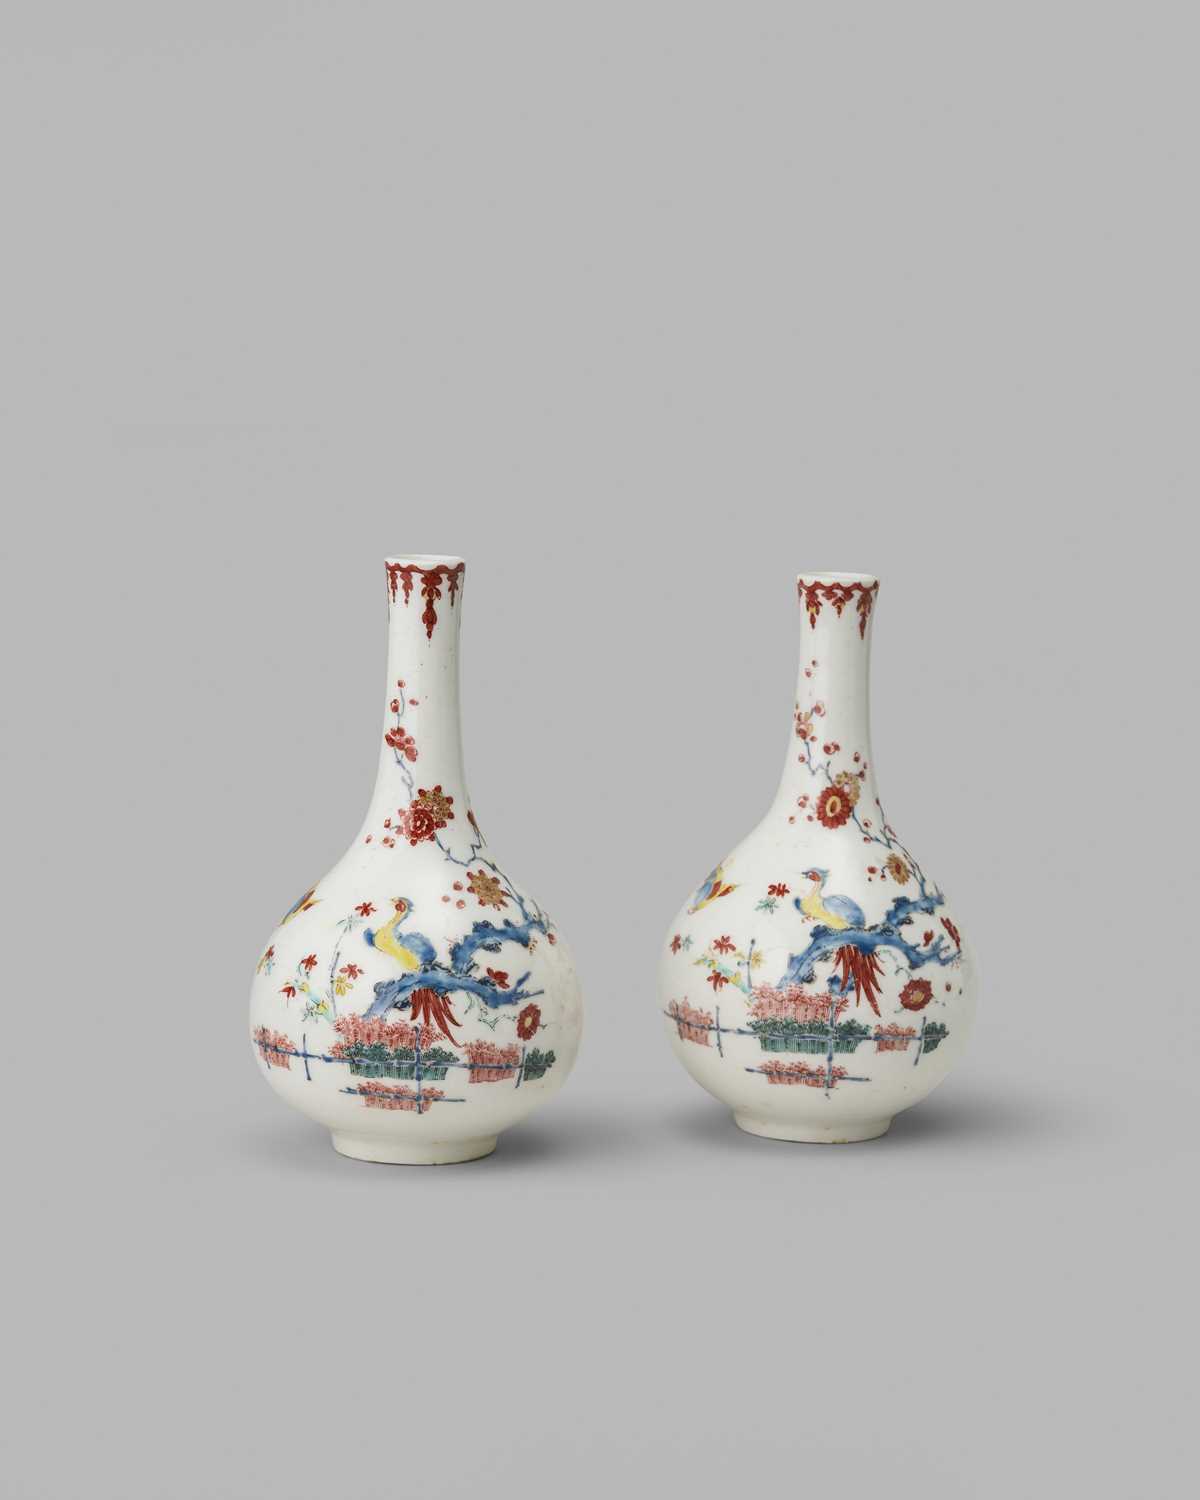 A rare pair of Bow bottle vases, c.1755, well painted in Kakiemon enamels, each with a long-tailed